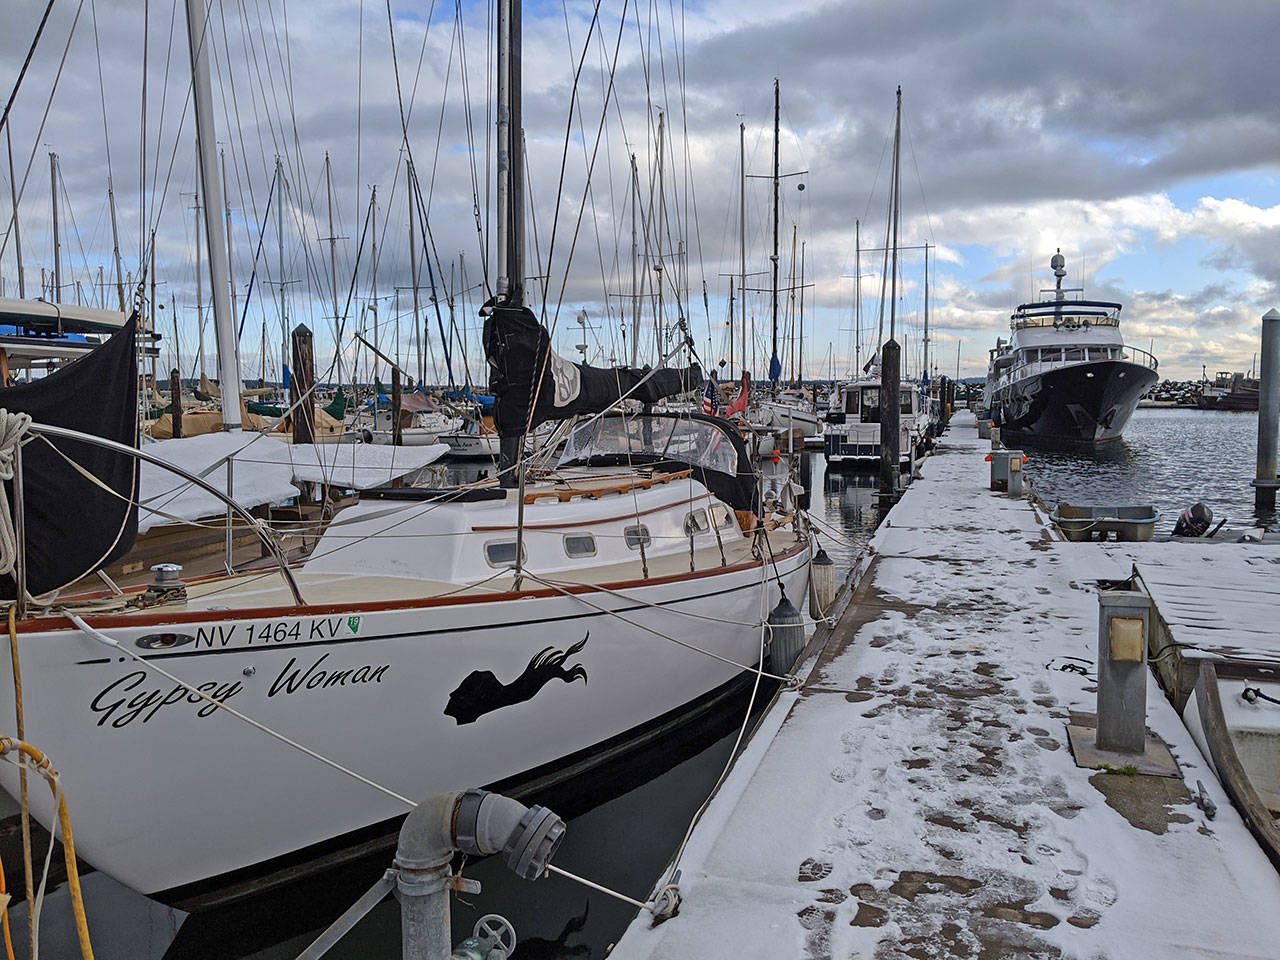 Snow lightly covered the Port of Port Townsend docks Tuesday after Port Townsend received a surprise small accumulation of snow overnight Monday. (Zach Jablonski/Peninsula Daily News)